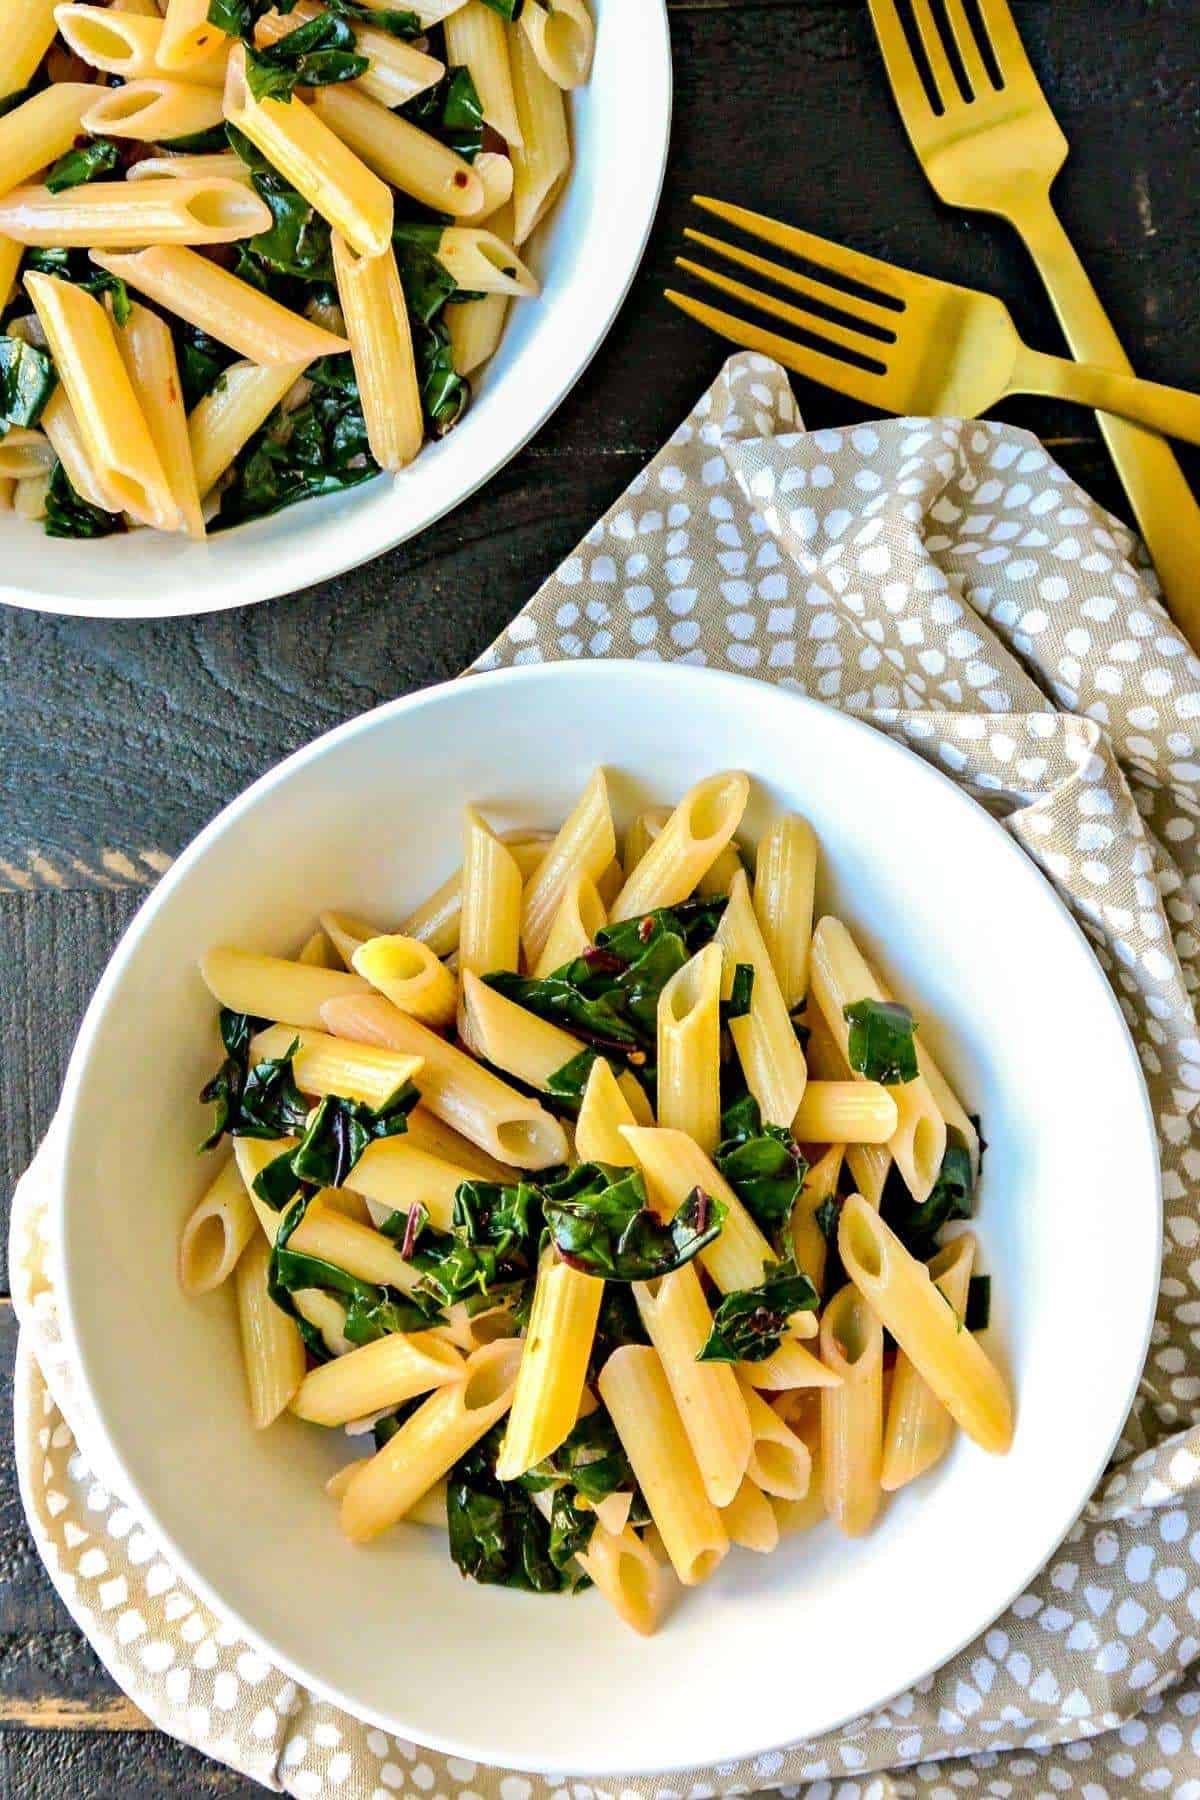 penne pasta tossed with Swiss chard and garlic, served in a white bowl.